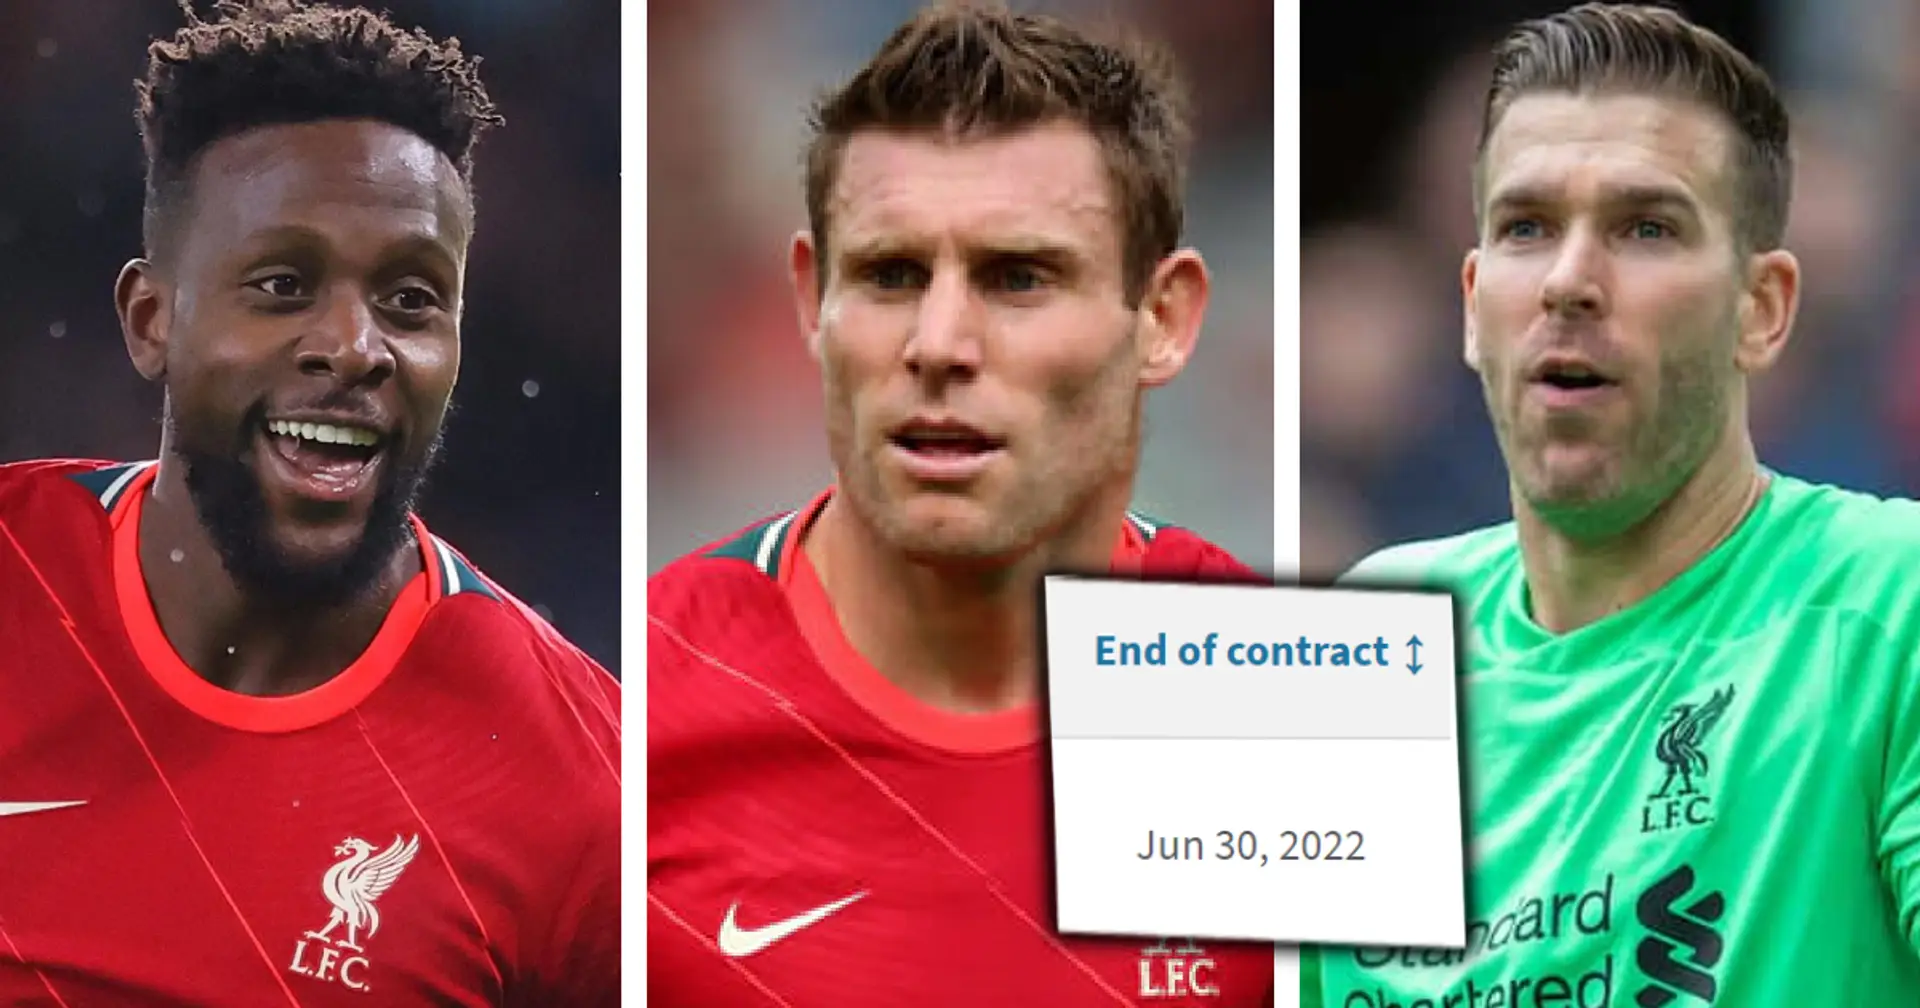 4 players could leave Anfield as free agents in summer: Liverpool's contract round-up